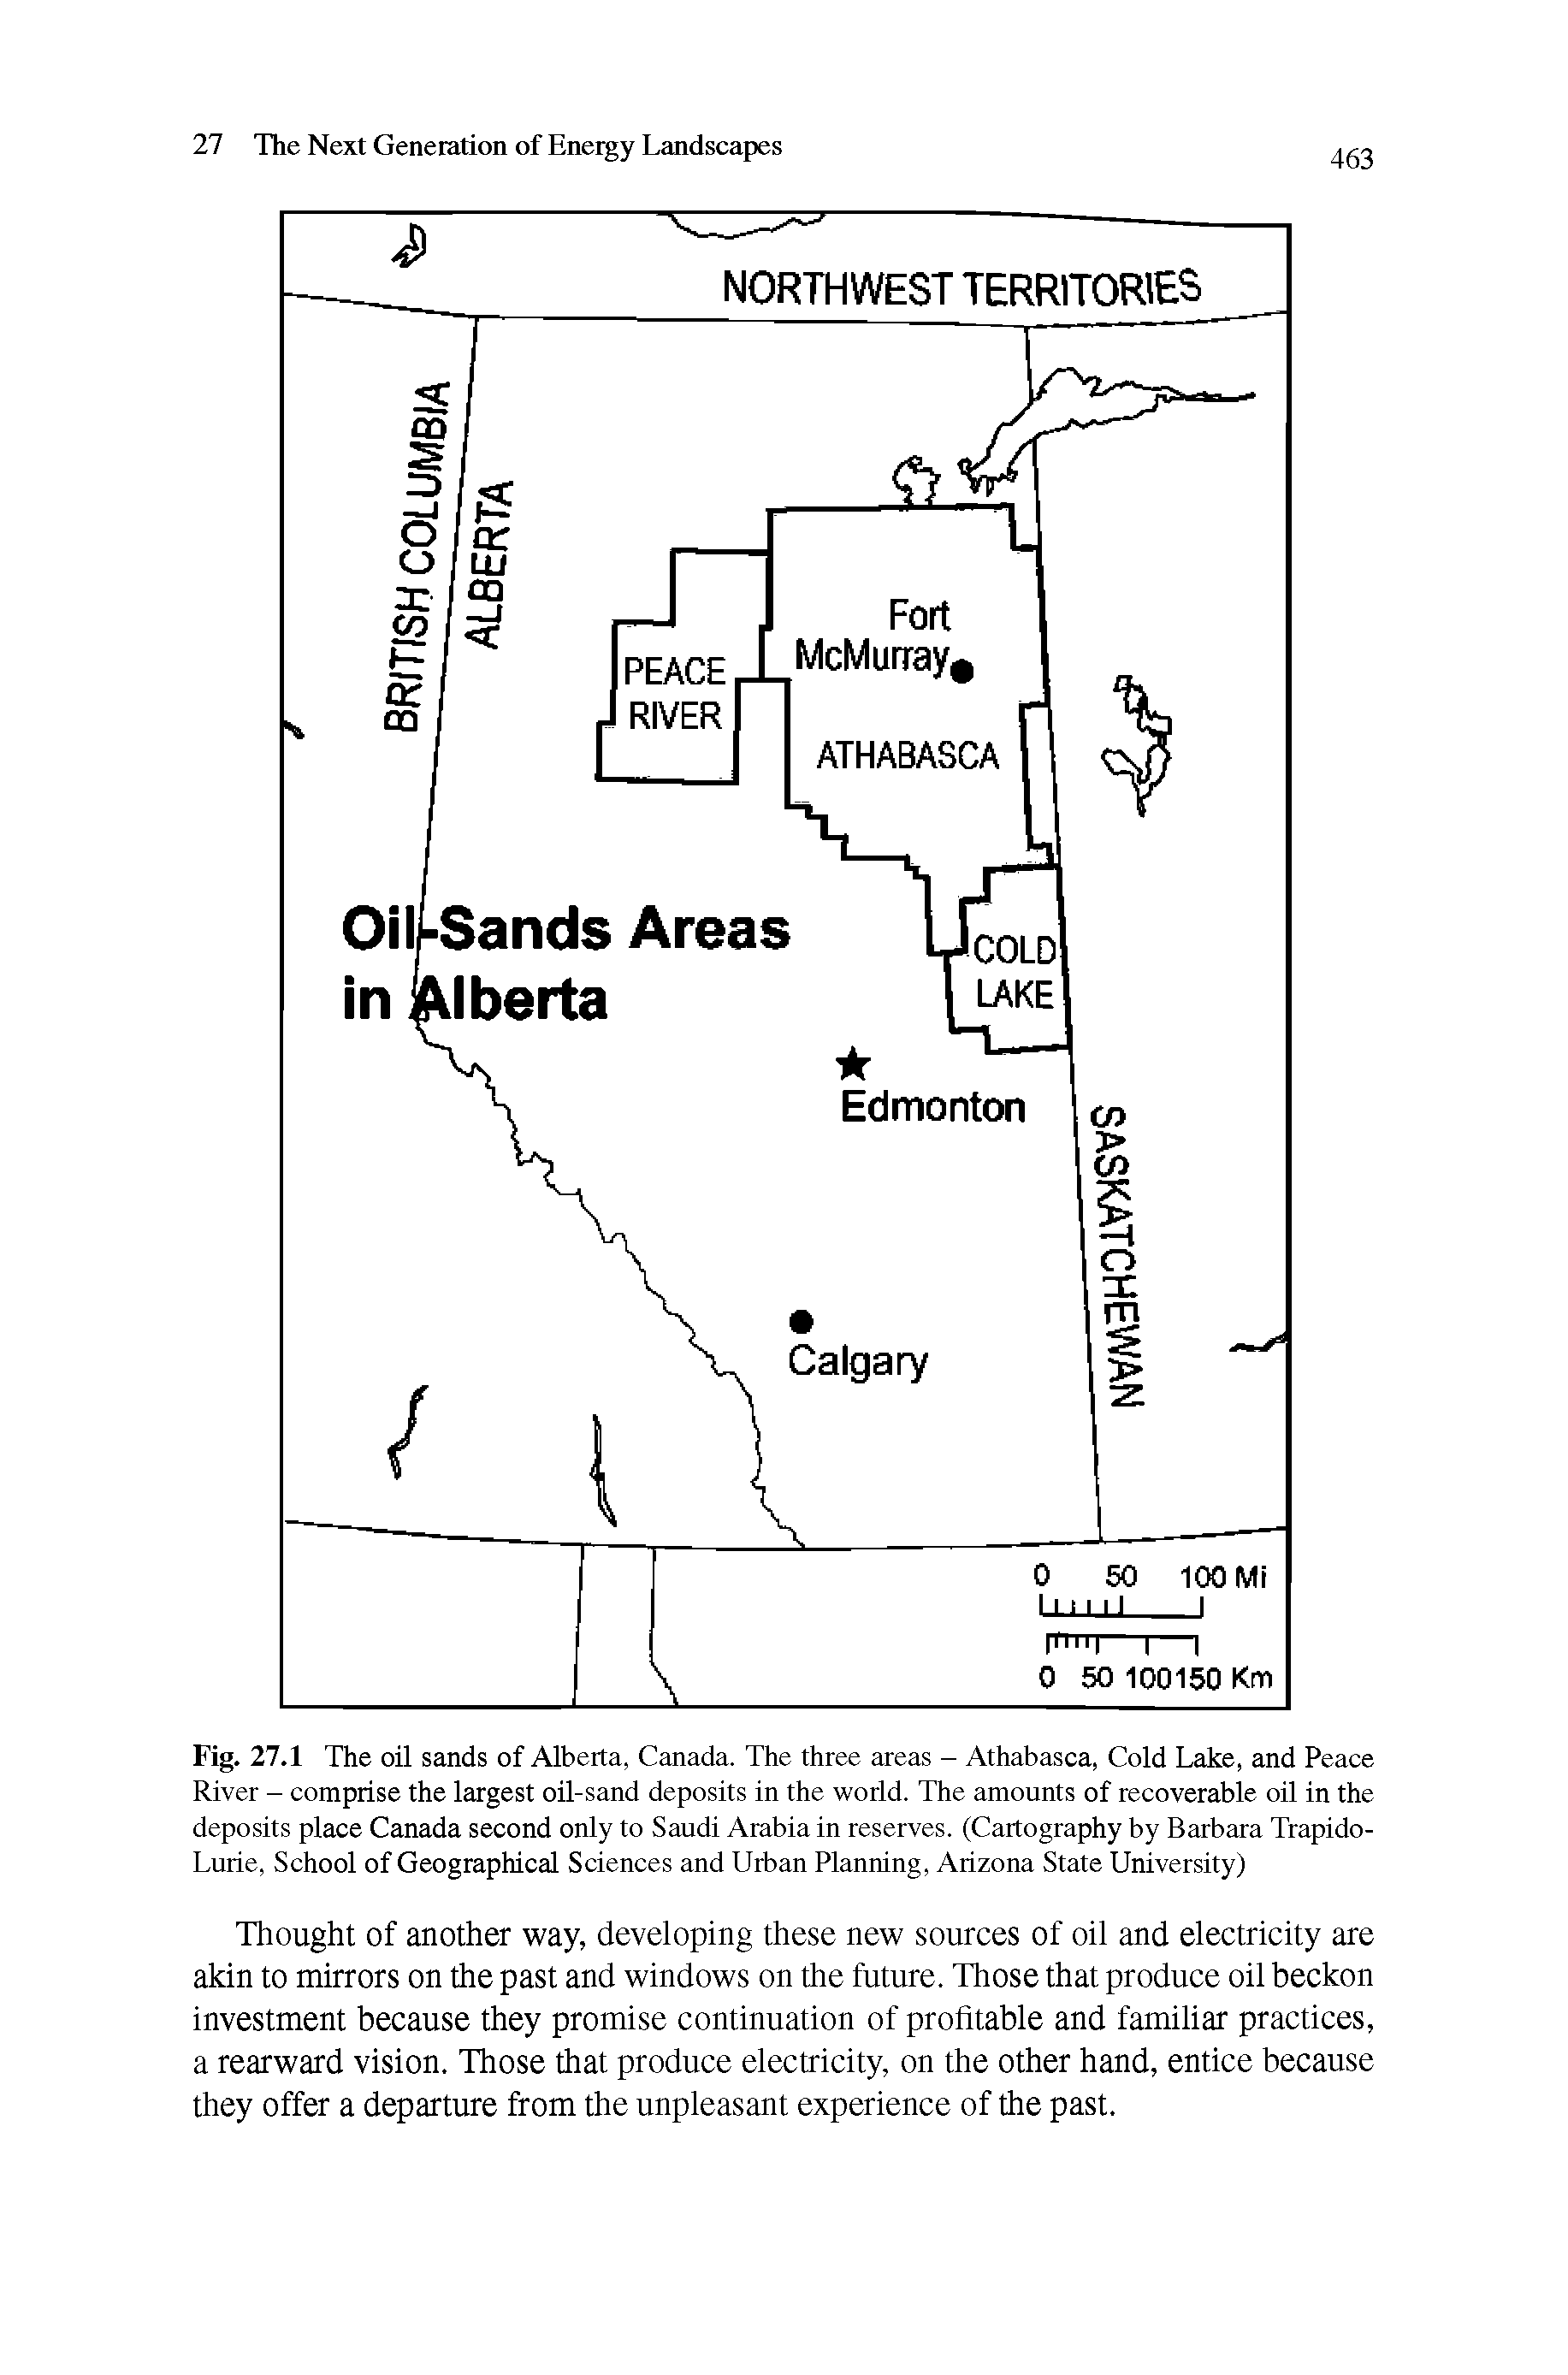 Fig. 27.1 The oil sands of Alberta, Canada. The three areas - Athabasca, Cold Lake, and Peace River - comprise the largest oil-sand deposits in the world. The amounts of recoverable oil in the deposits place Canada second only to Saudi Arabia in reserves. (Cartography by Barbara Trapido-Lurie, School of Geographical Sciences and Urban Planning, Arizona State University)...